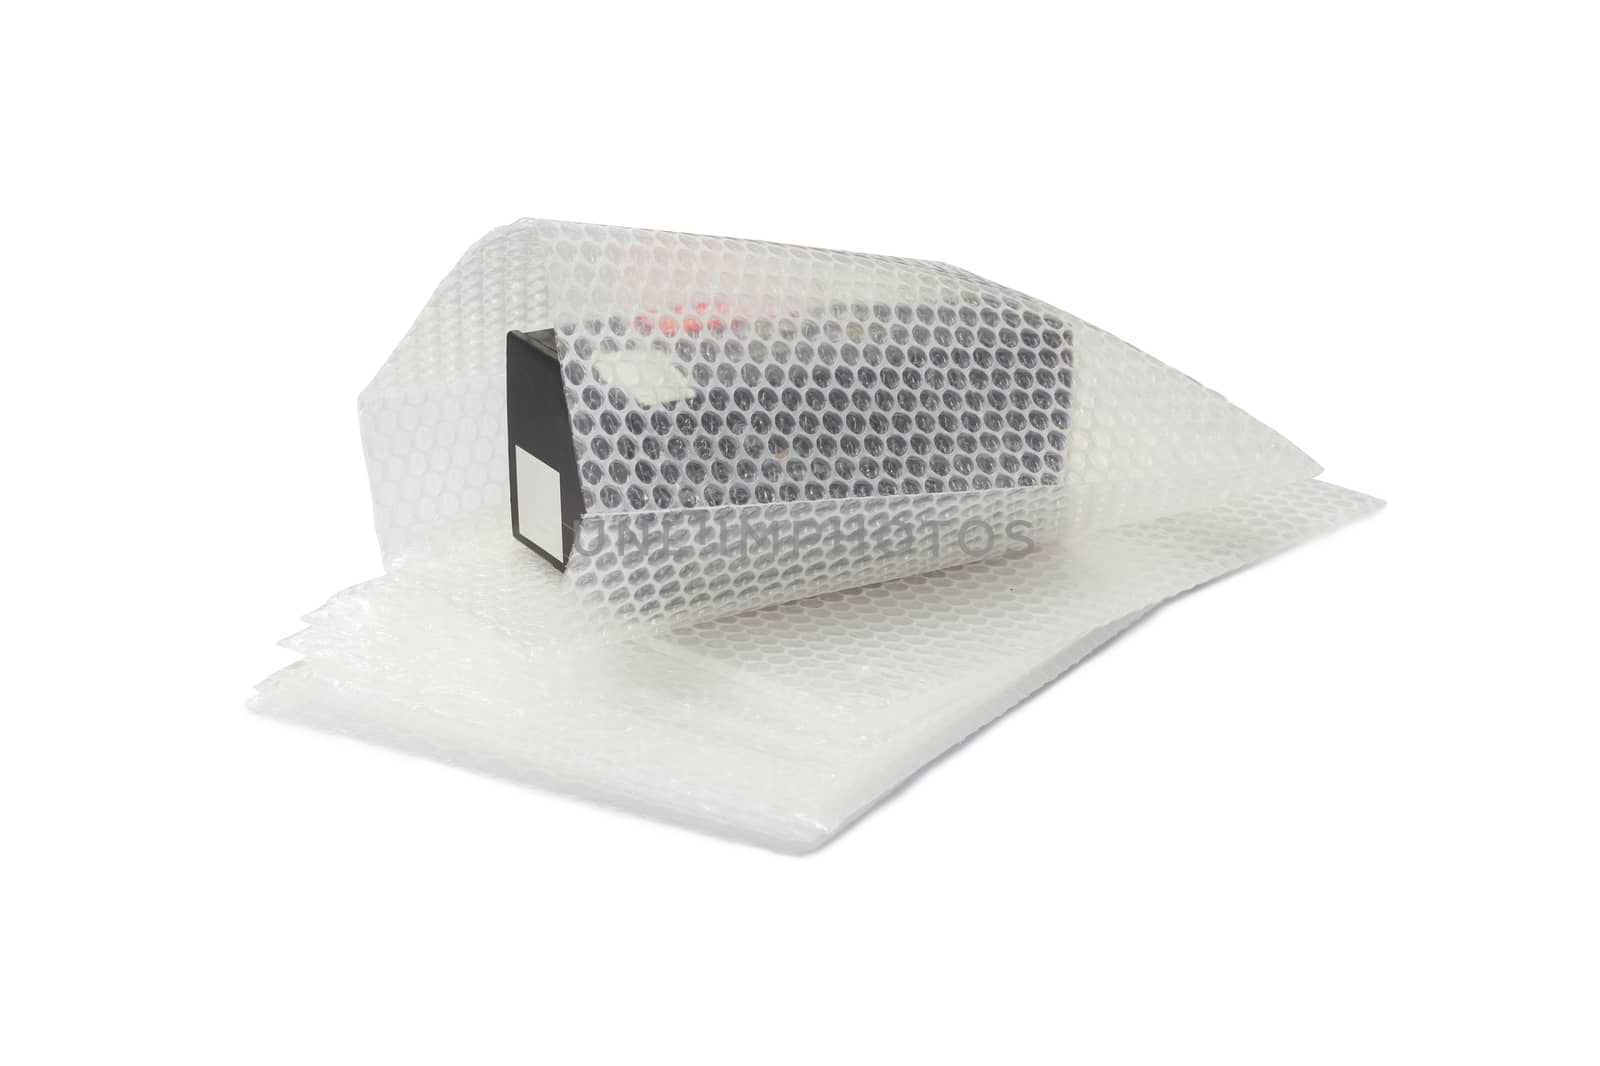 bubble wrap, for protection product cracked  or insurance During transit isolated and white background